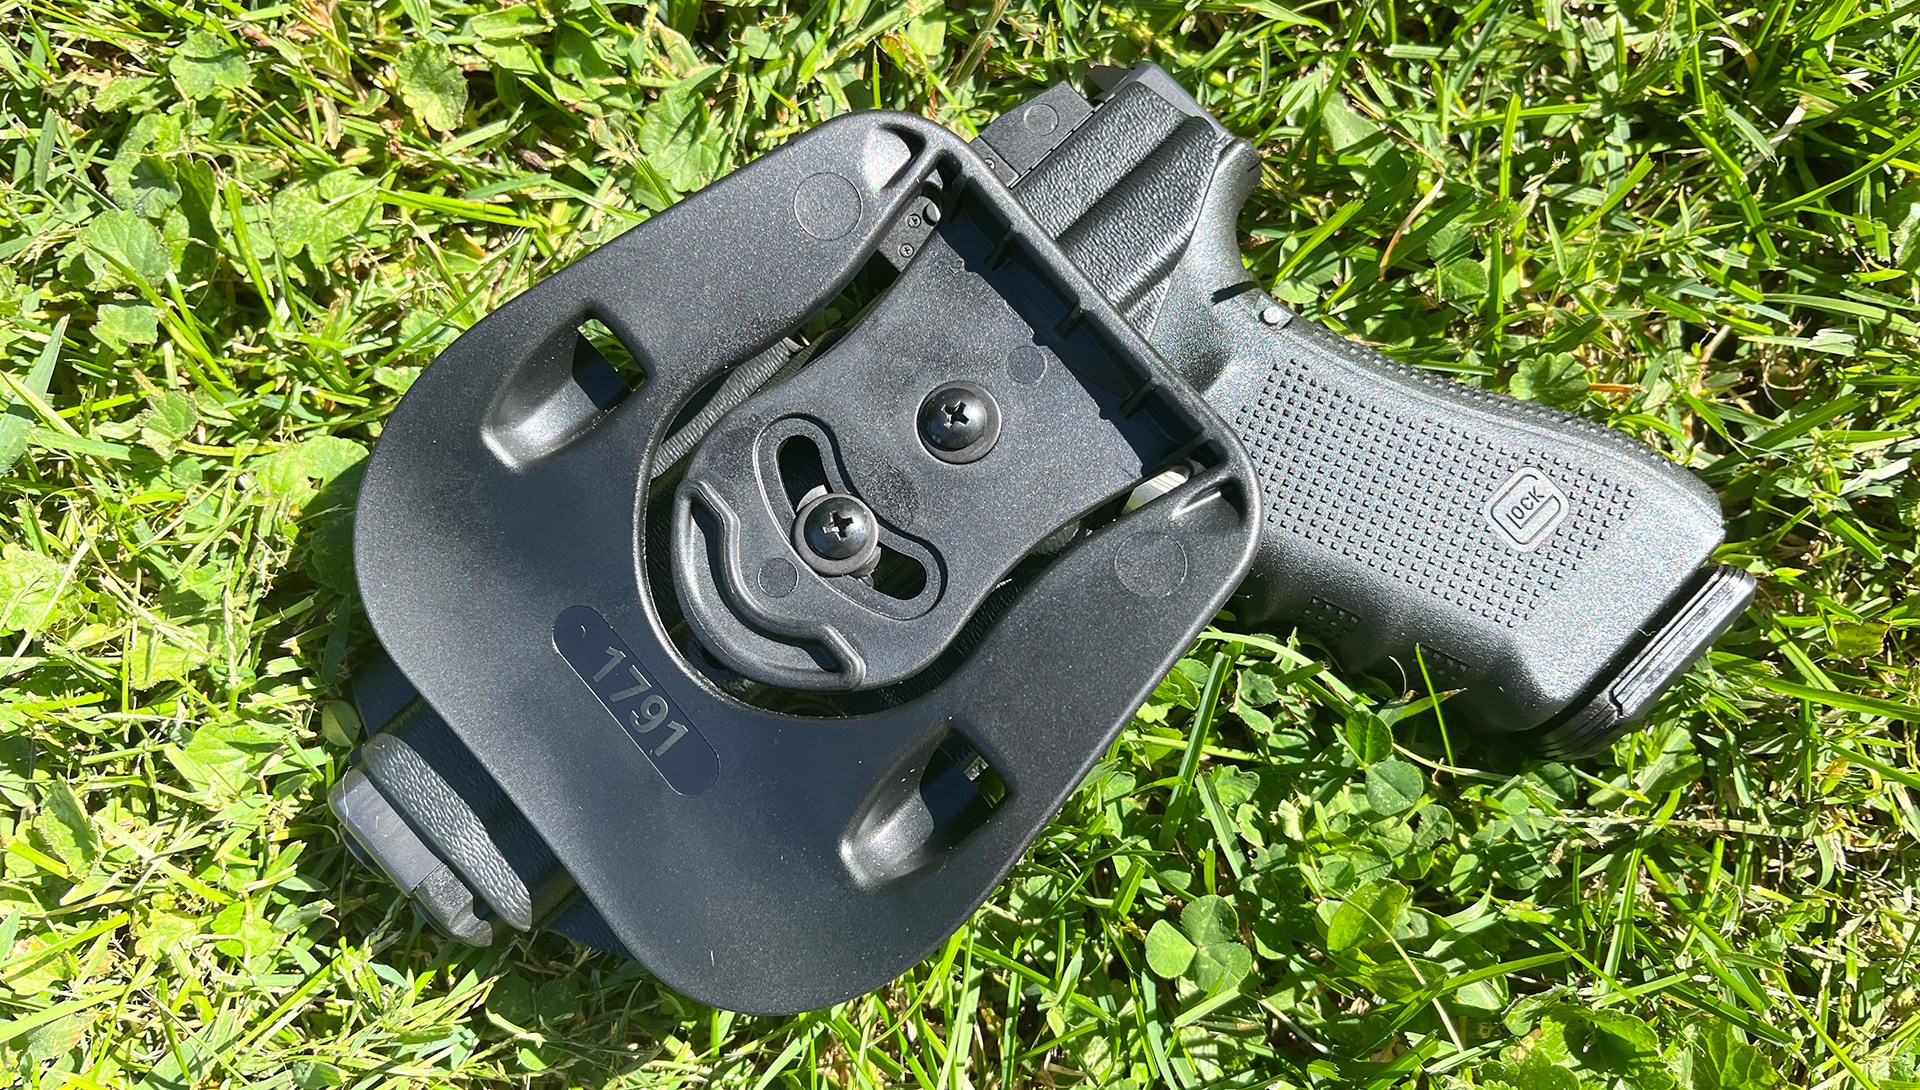 V. Key Components and Materials Used in Holster Making